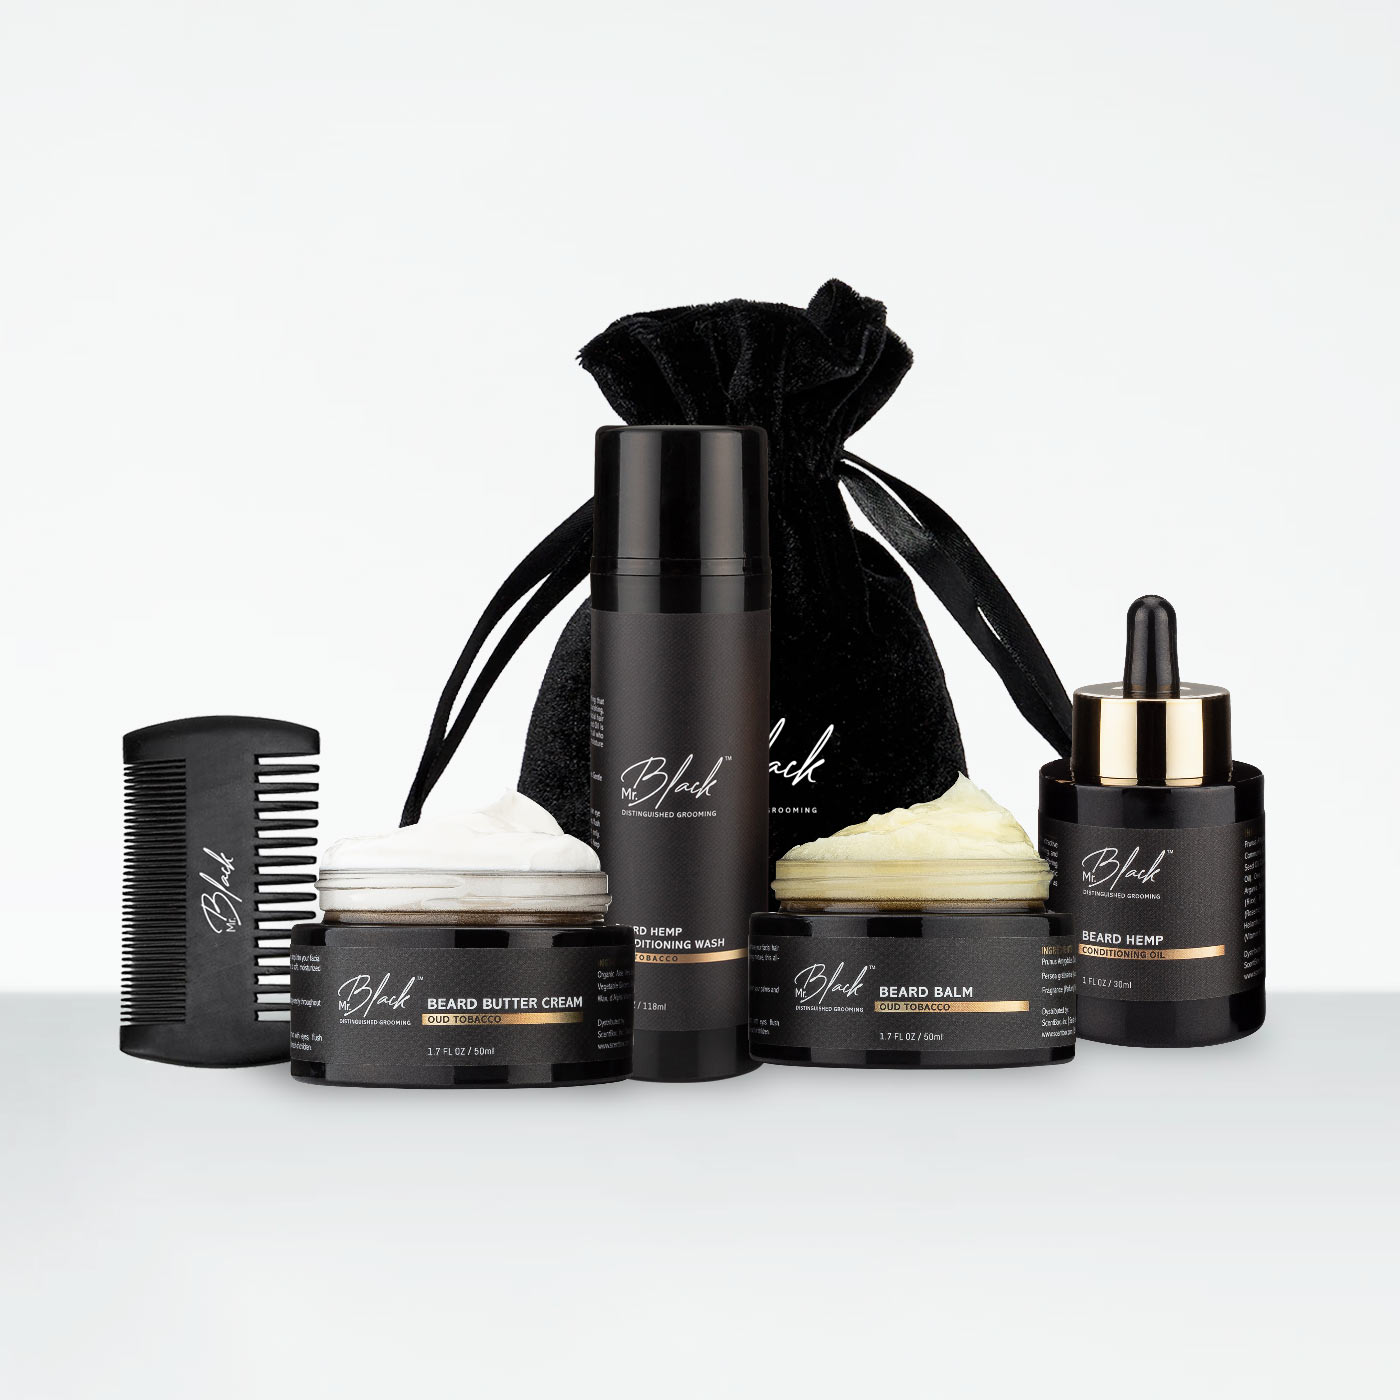 Heritage Men's Grooming Set | Gifts | Caswell-Massey®